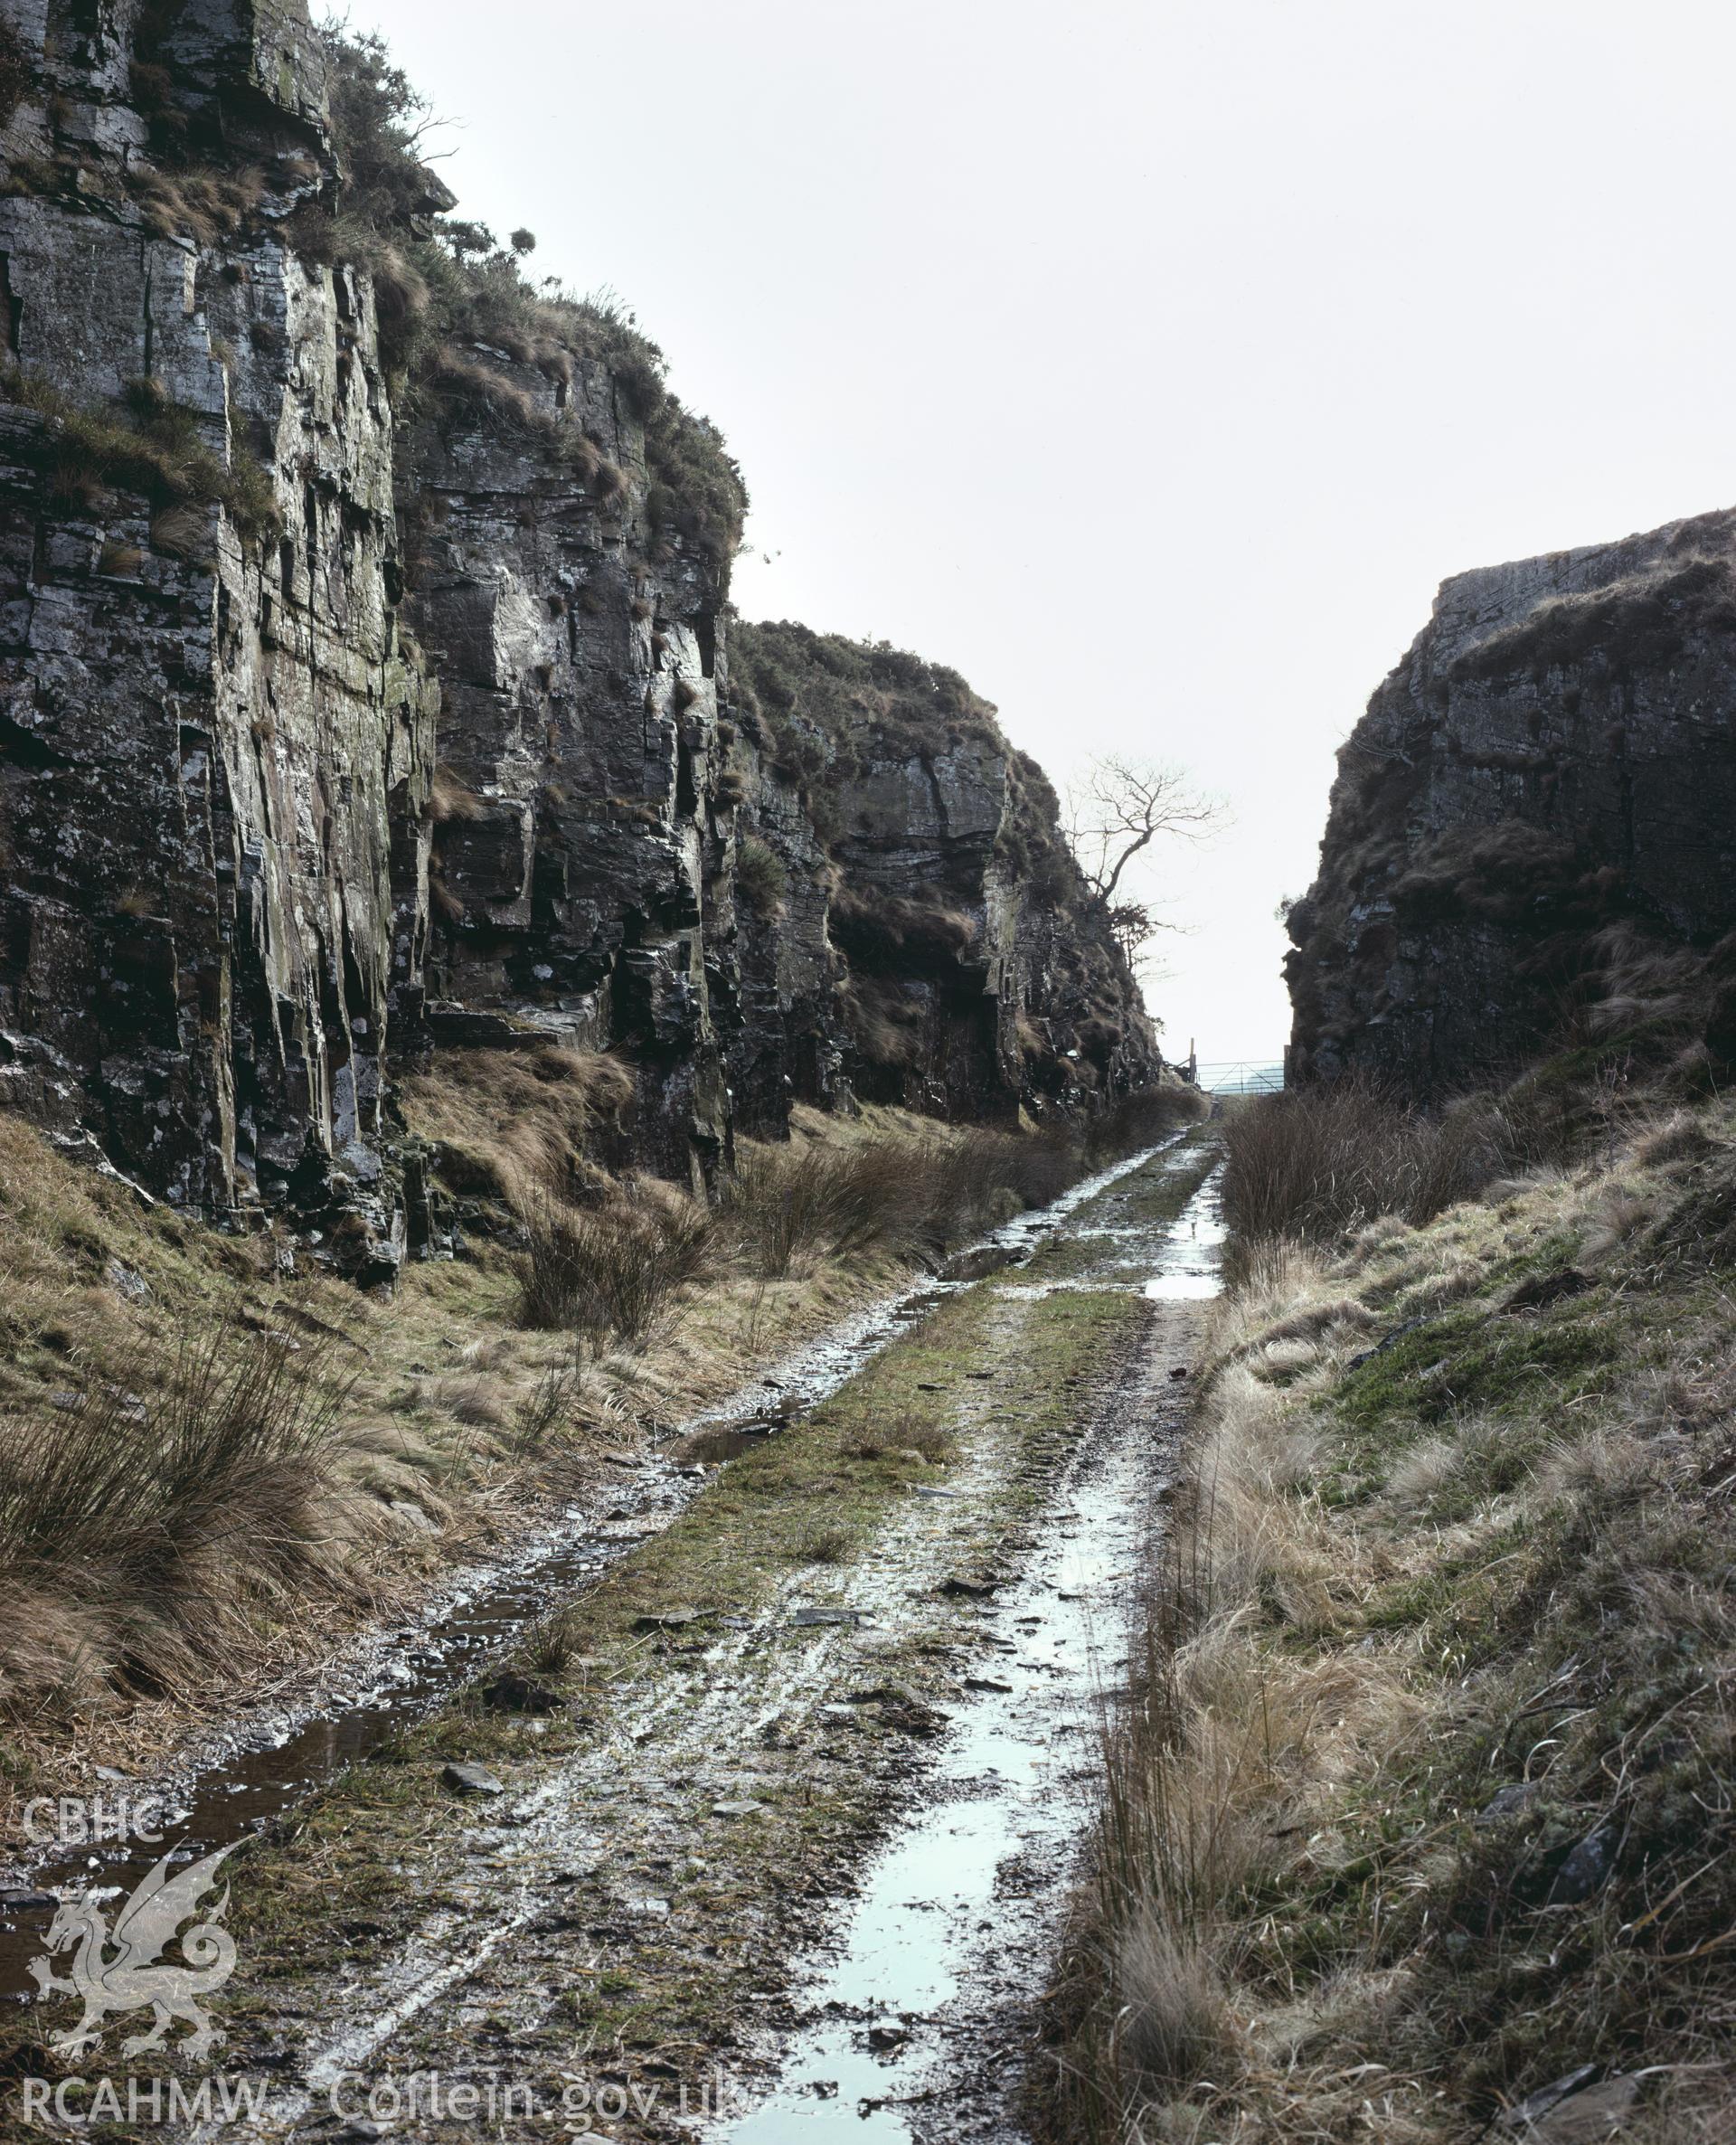 RCAHMW colour transparency showing the Glyncorrwg Railway Cutting at Parsons Folly, taken by Iain Wright, c.1981